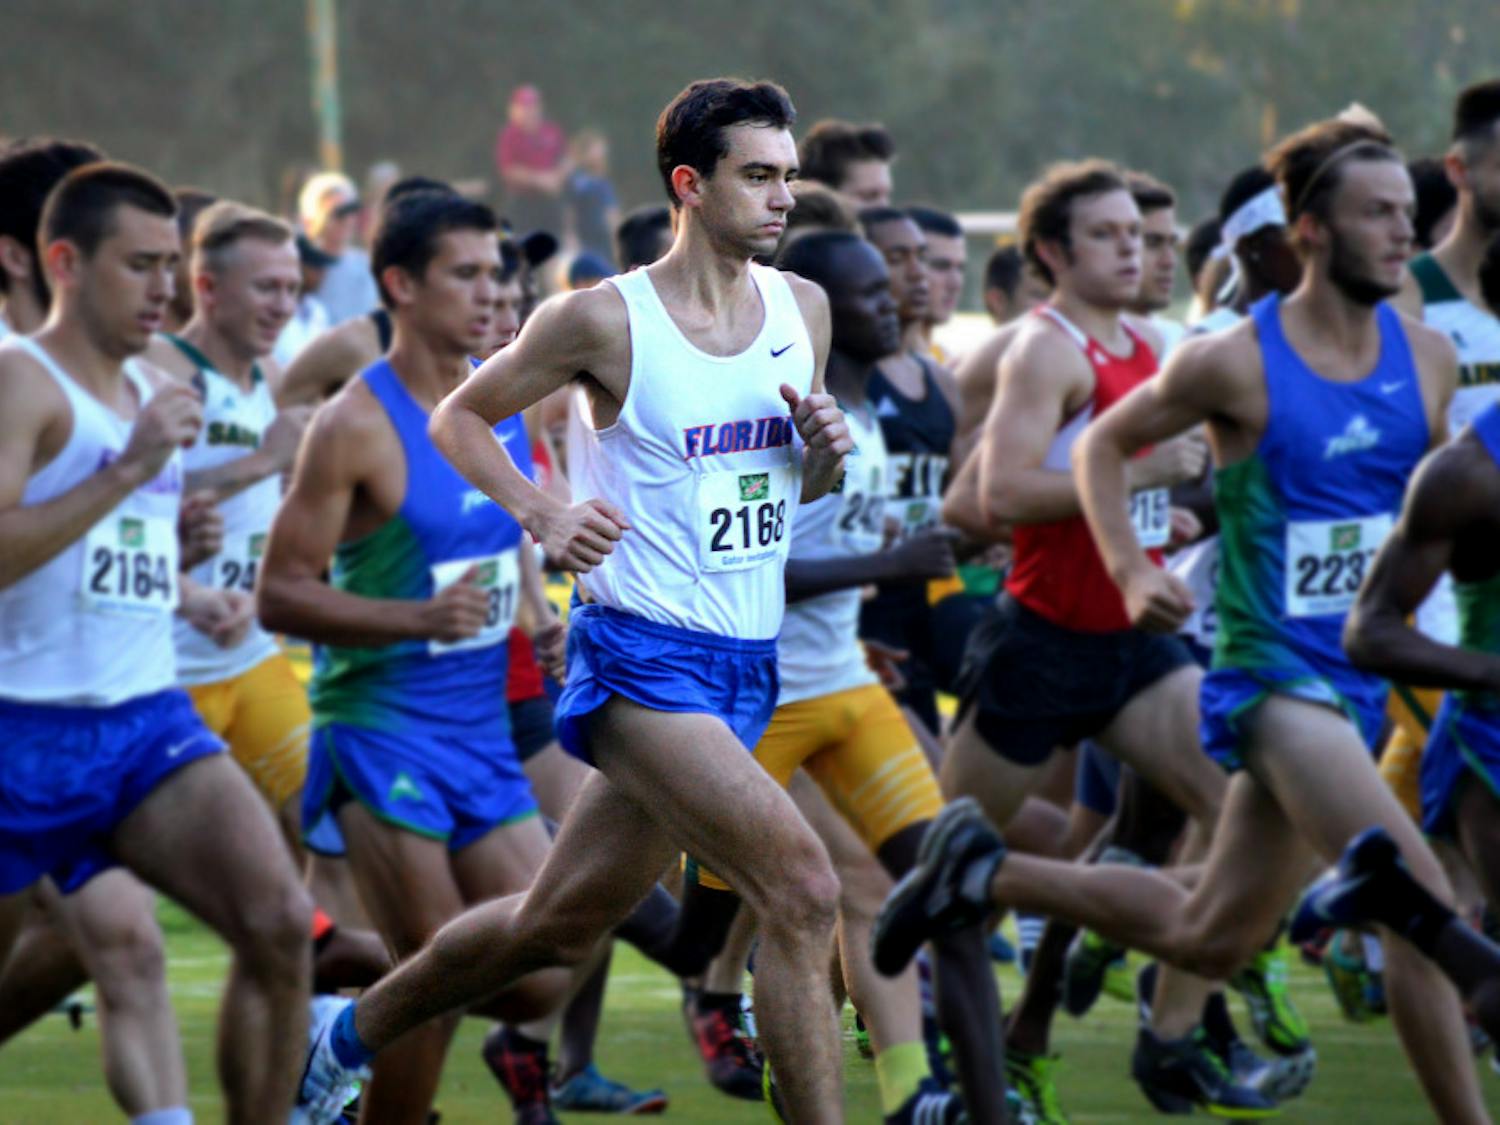 Florida’s men’s cross country team is tied for fourth with Kentucky in the 2019 SEC Cross Country Coaches’ Preseason Poll. The women’s team is ranked third.